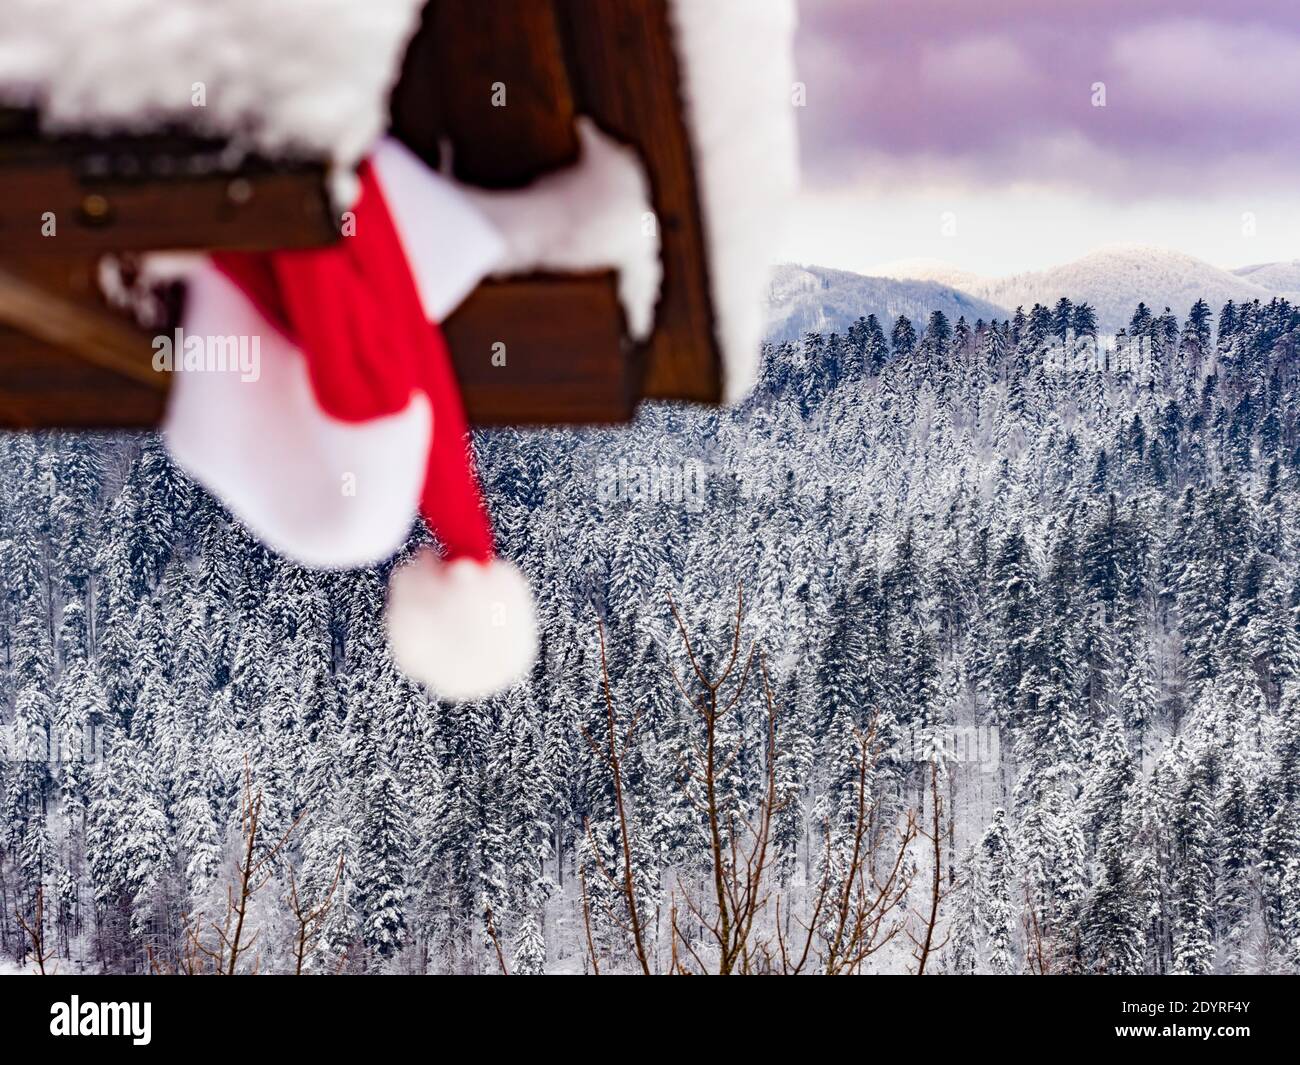 Santa Claus Red cap attached under wooden log cabin roof Winter show landscape scenery scenic panorama Stock Photo